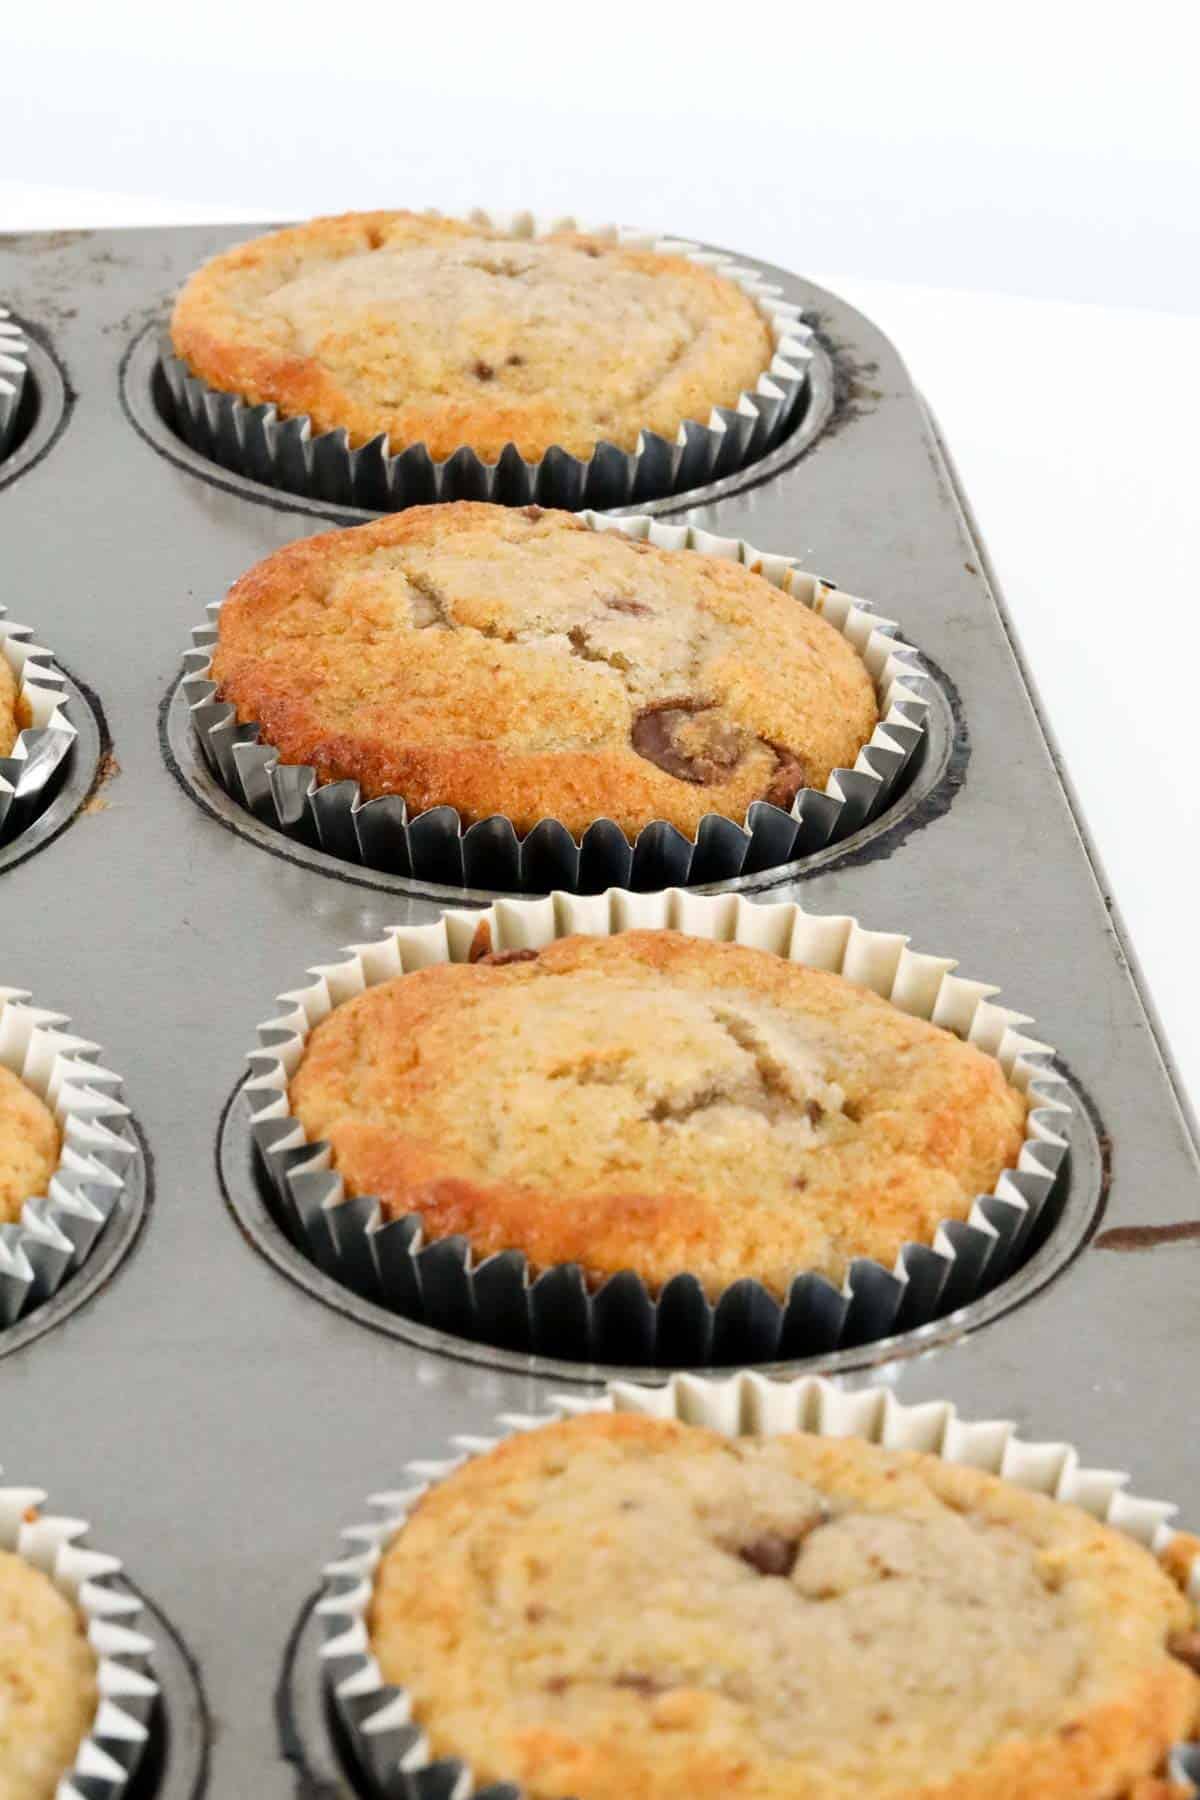 Muffins in a muffin tray.